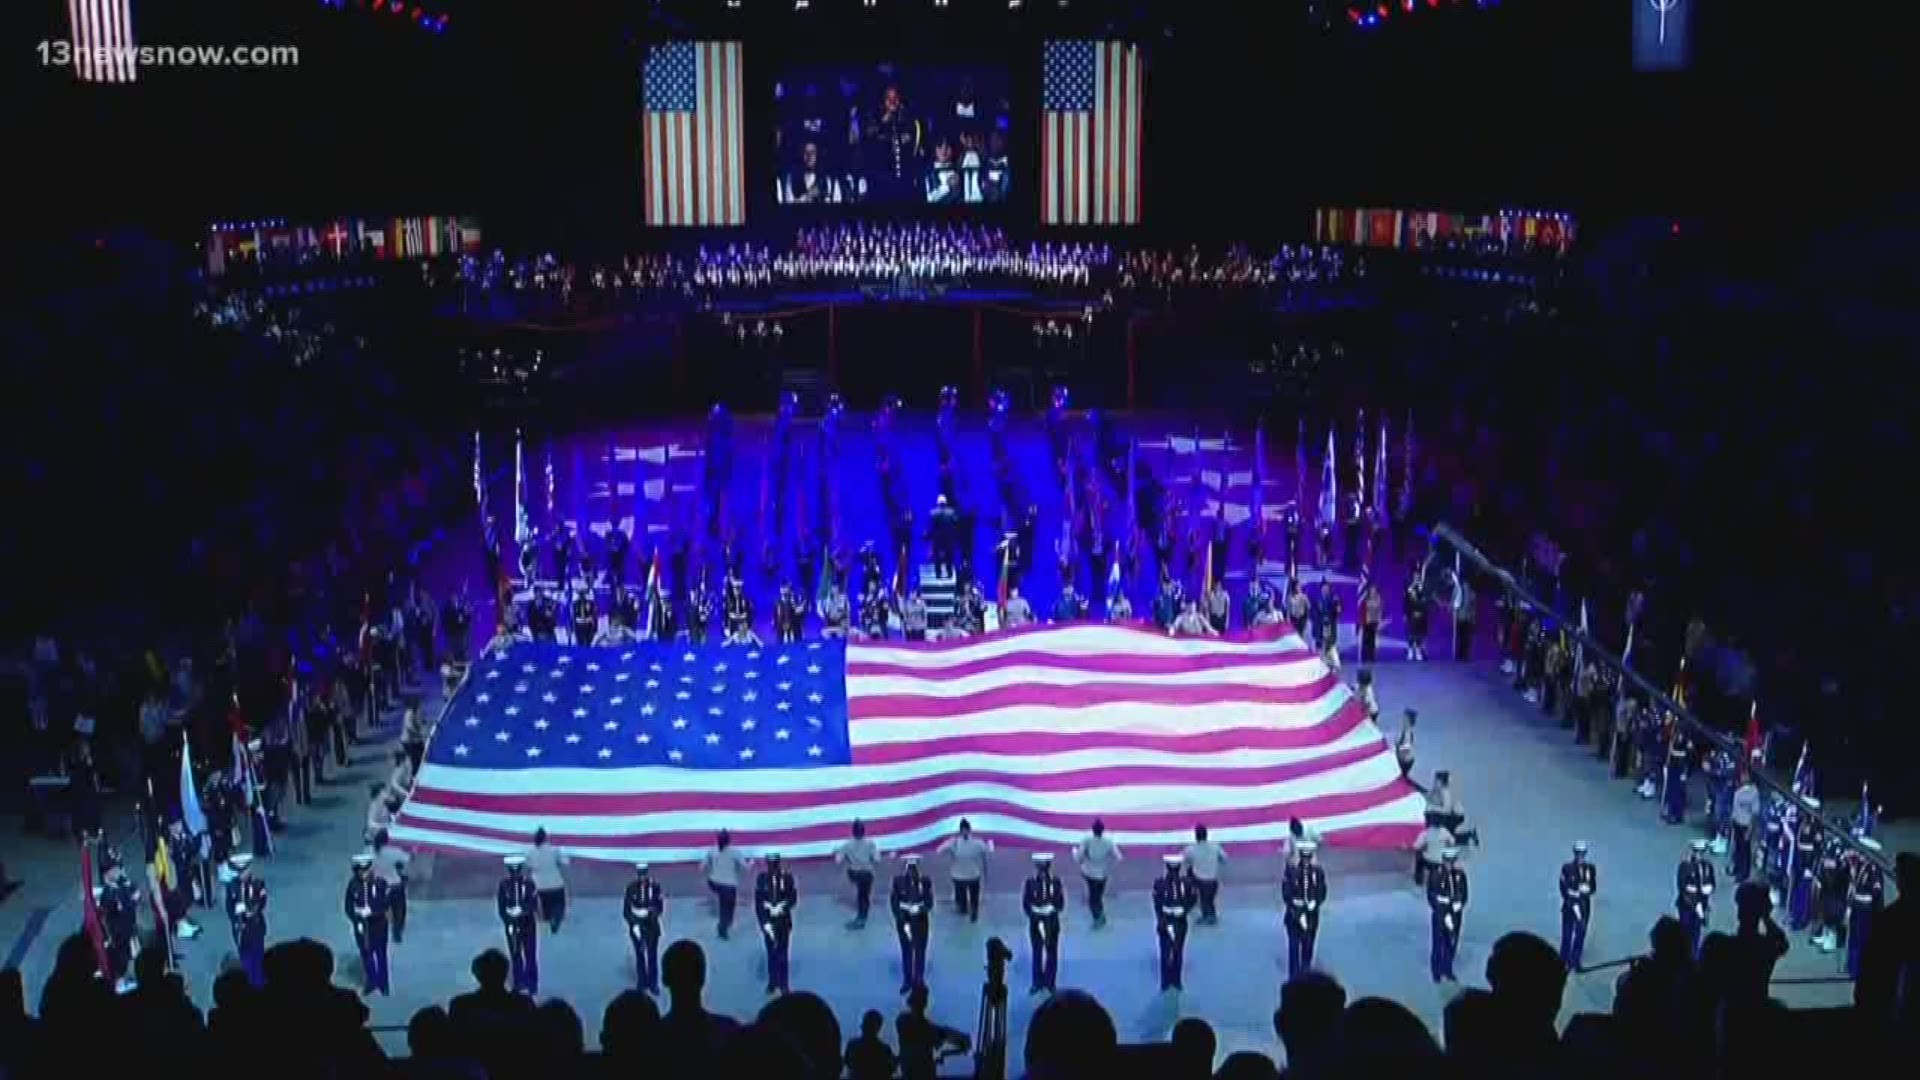 The 2019 Virginia International tattoo kicks off this weekend at the Norfolk Scope.